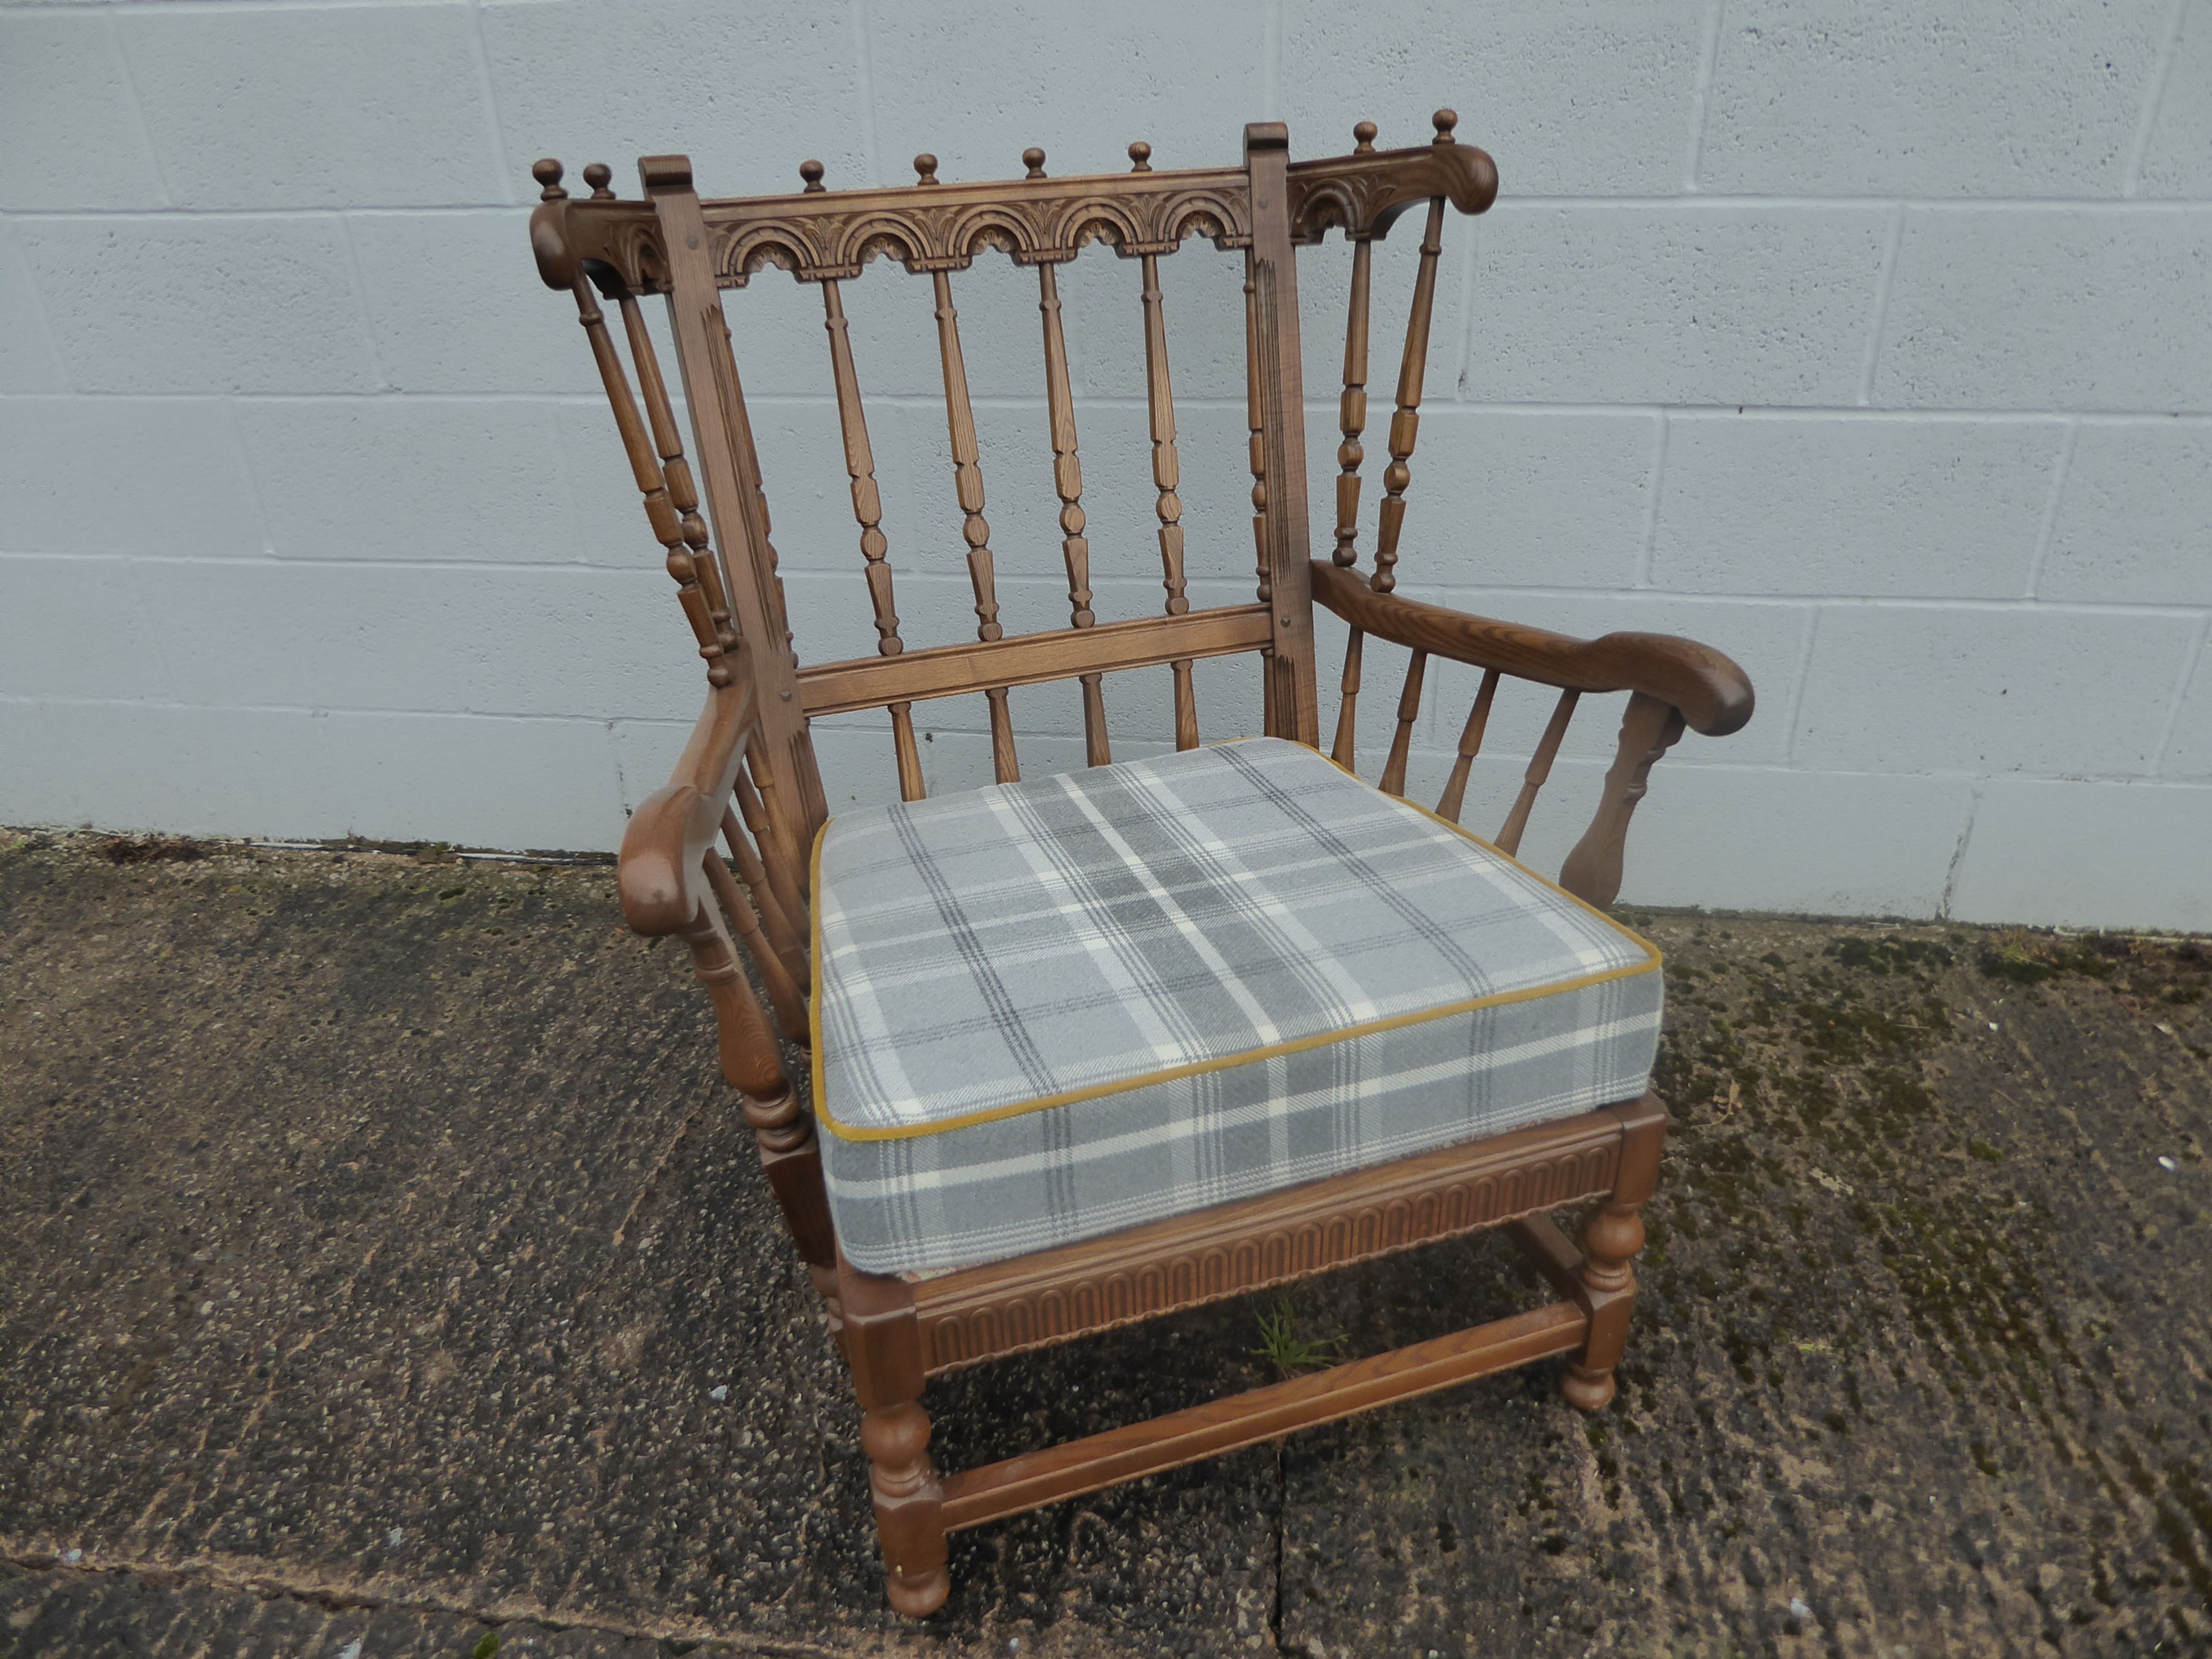 Ercol Cloister Seat cushion in Dove Grey with Mustard Piping